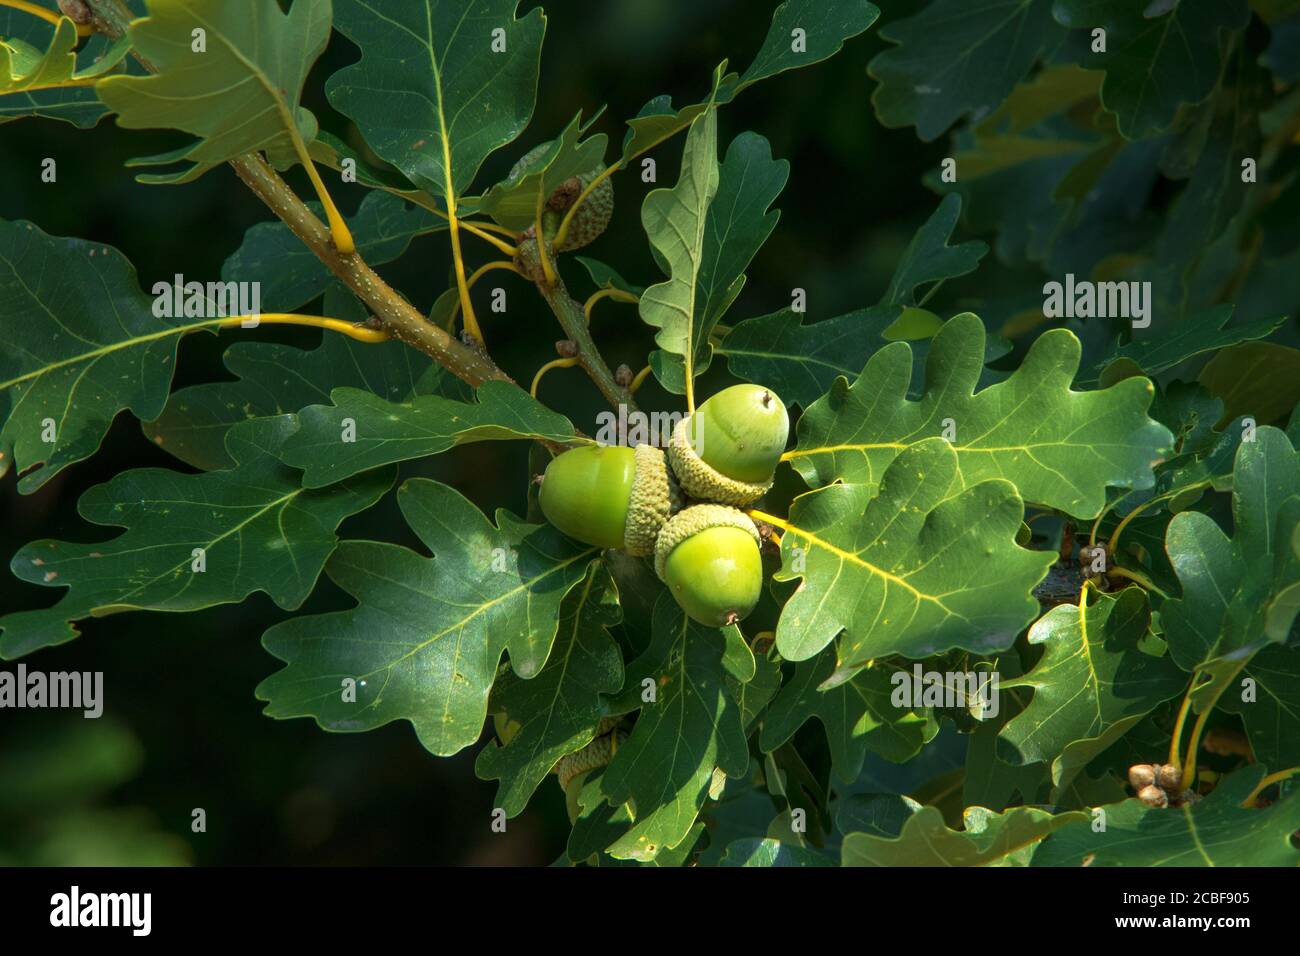 Oak twig with green leaves and acorns, oak trees in the forest. Stock Photo